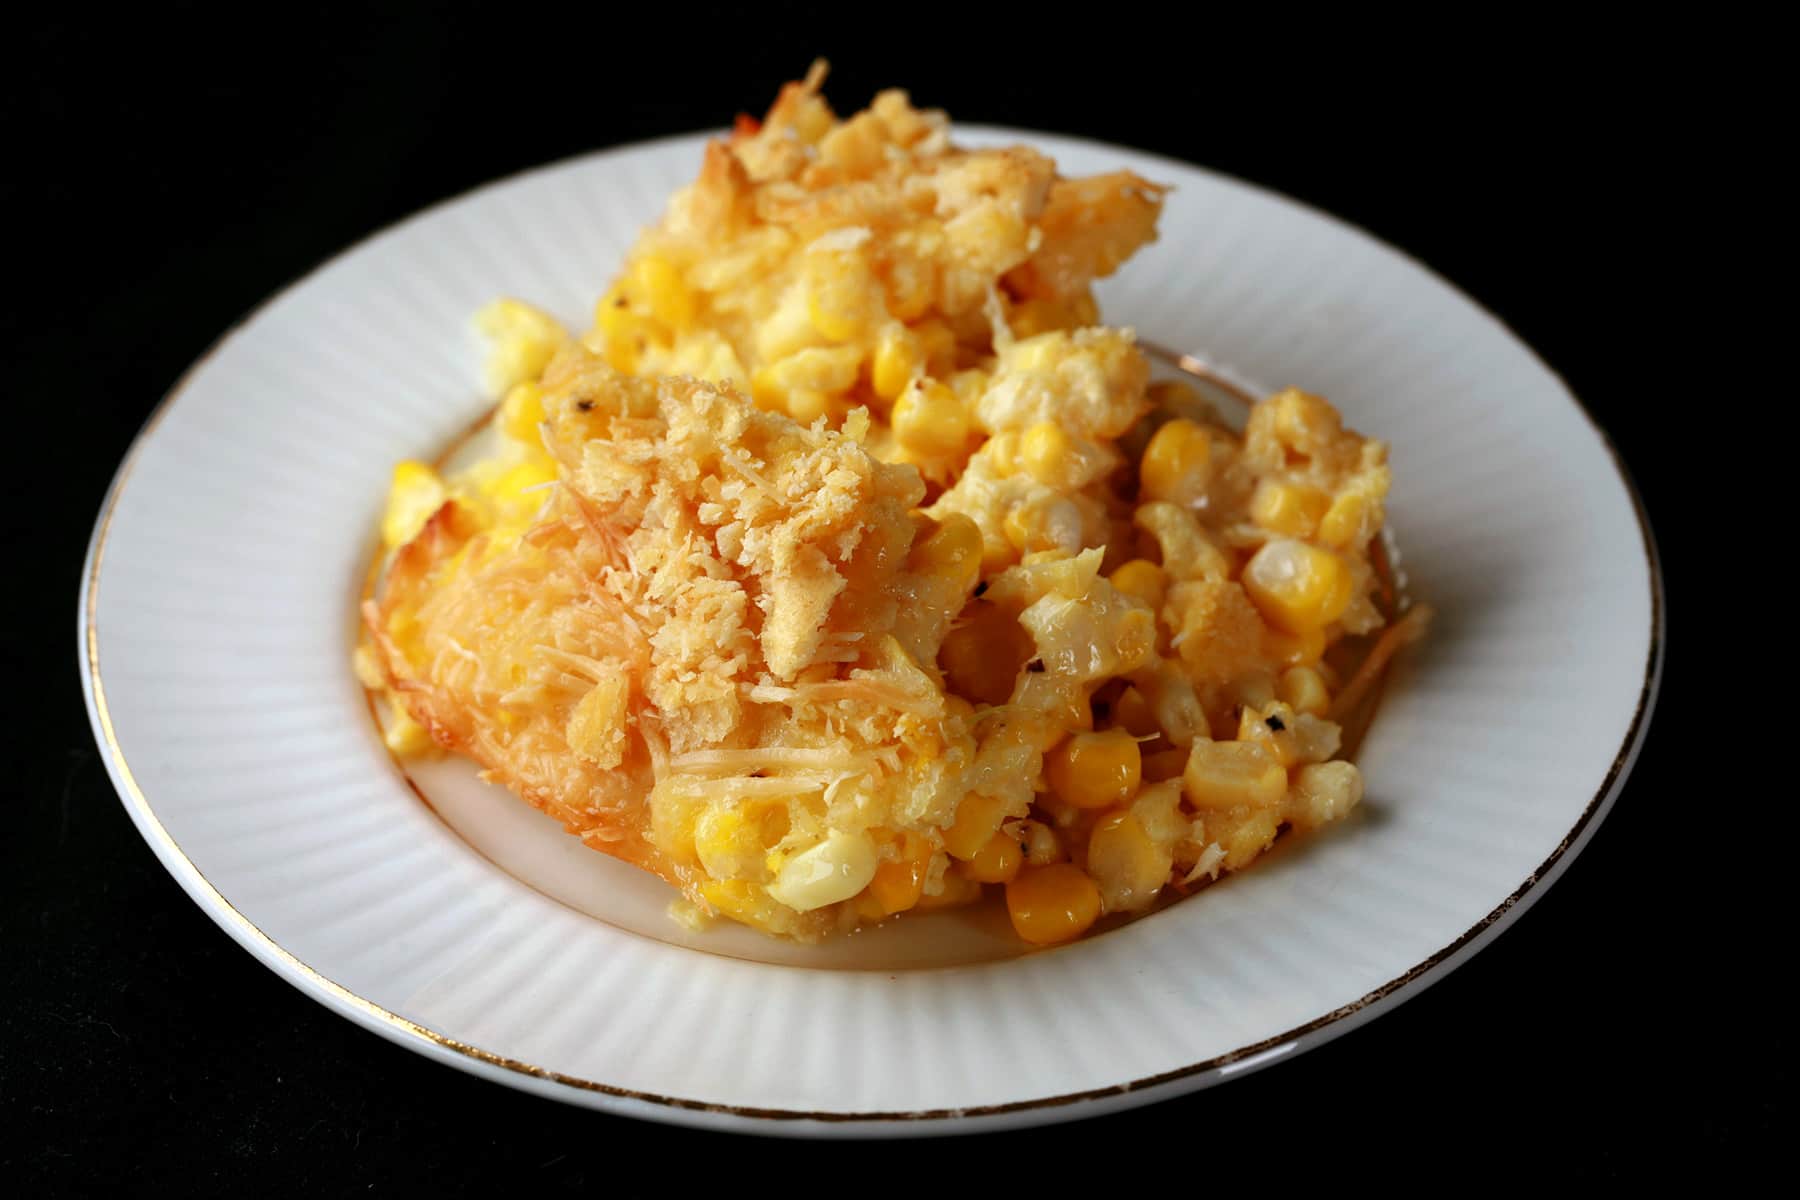 A serving of scalloped corn - fresh sweet corn, cheese, crackers, and more - on a small white plate.